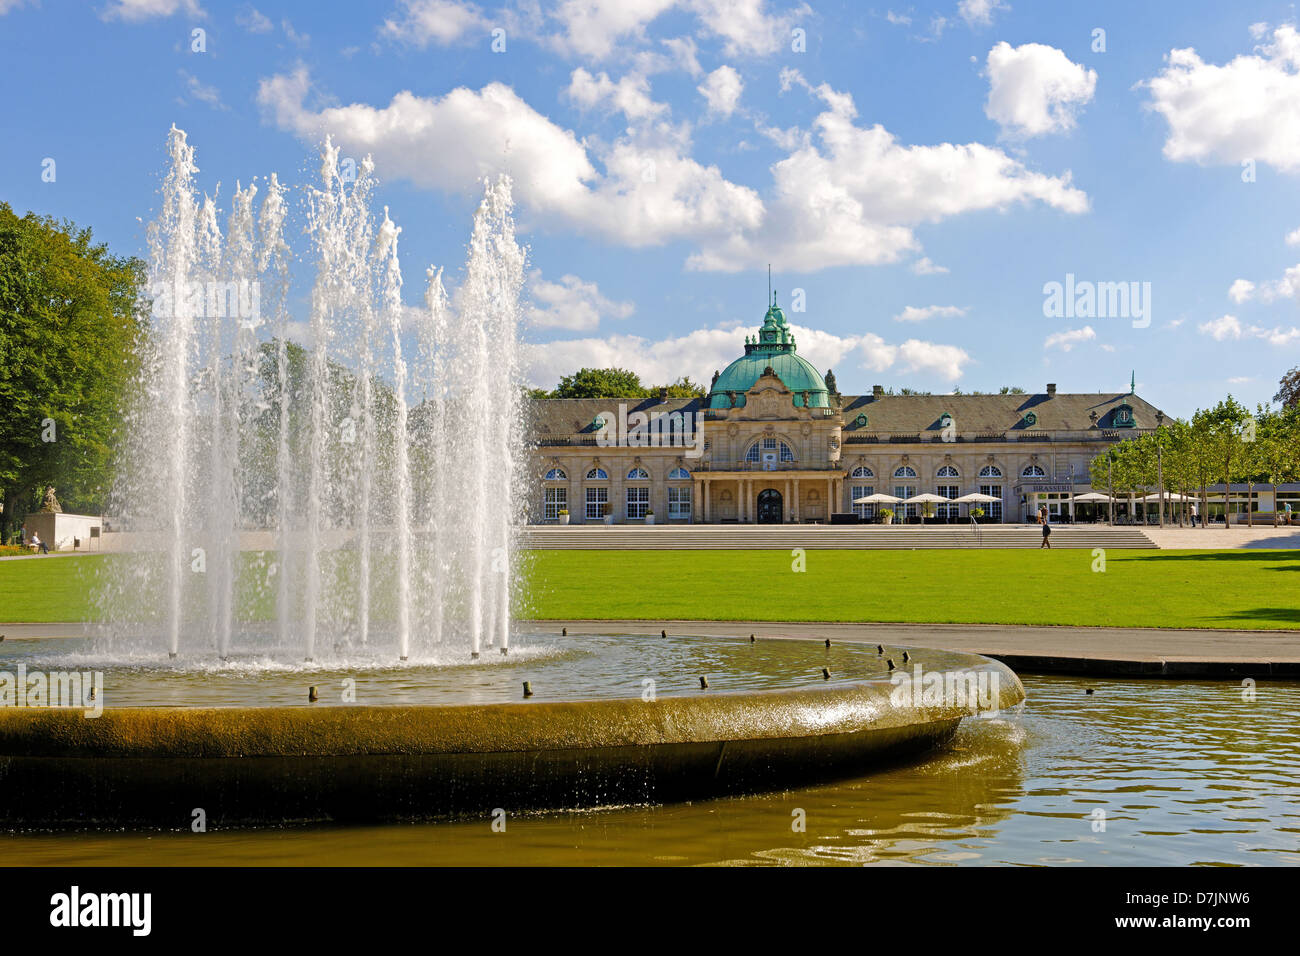 The imperial palace in the health resort park in Bad Oeynhausen, Germany Stock Photo